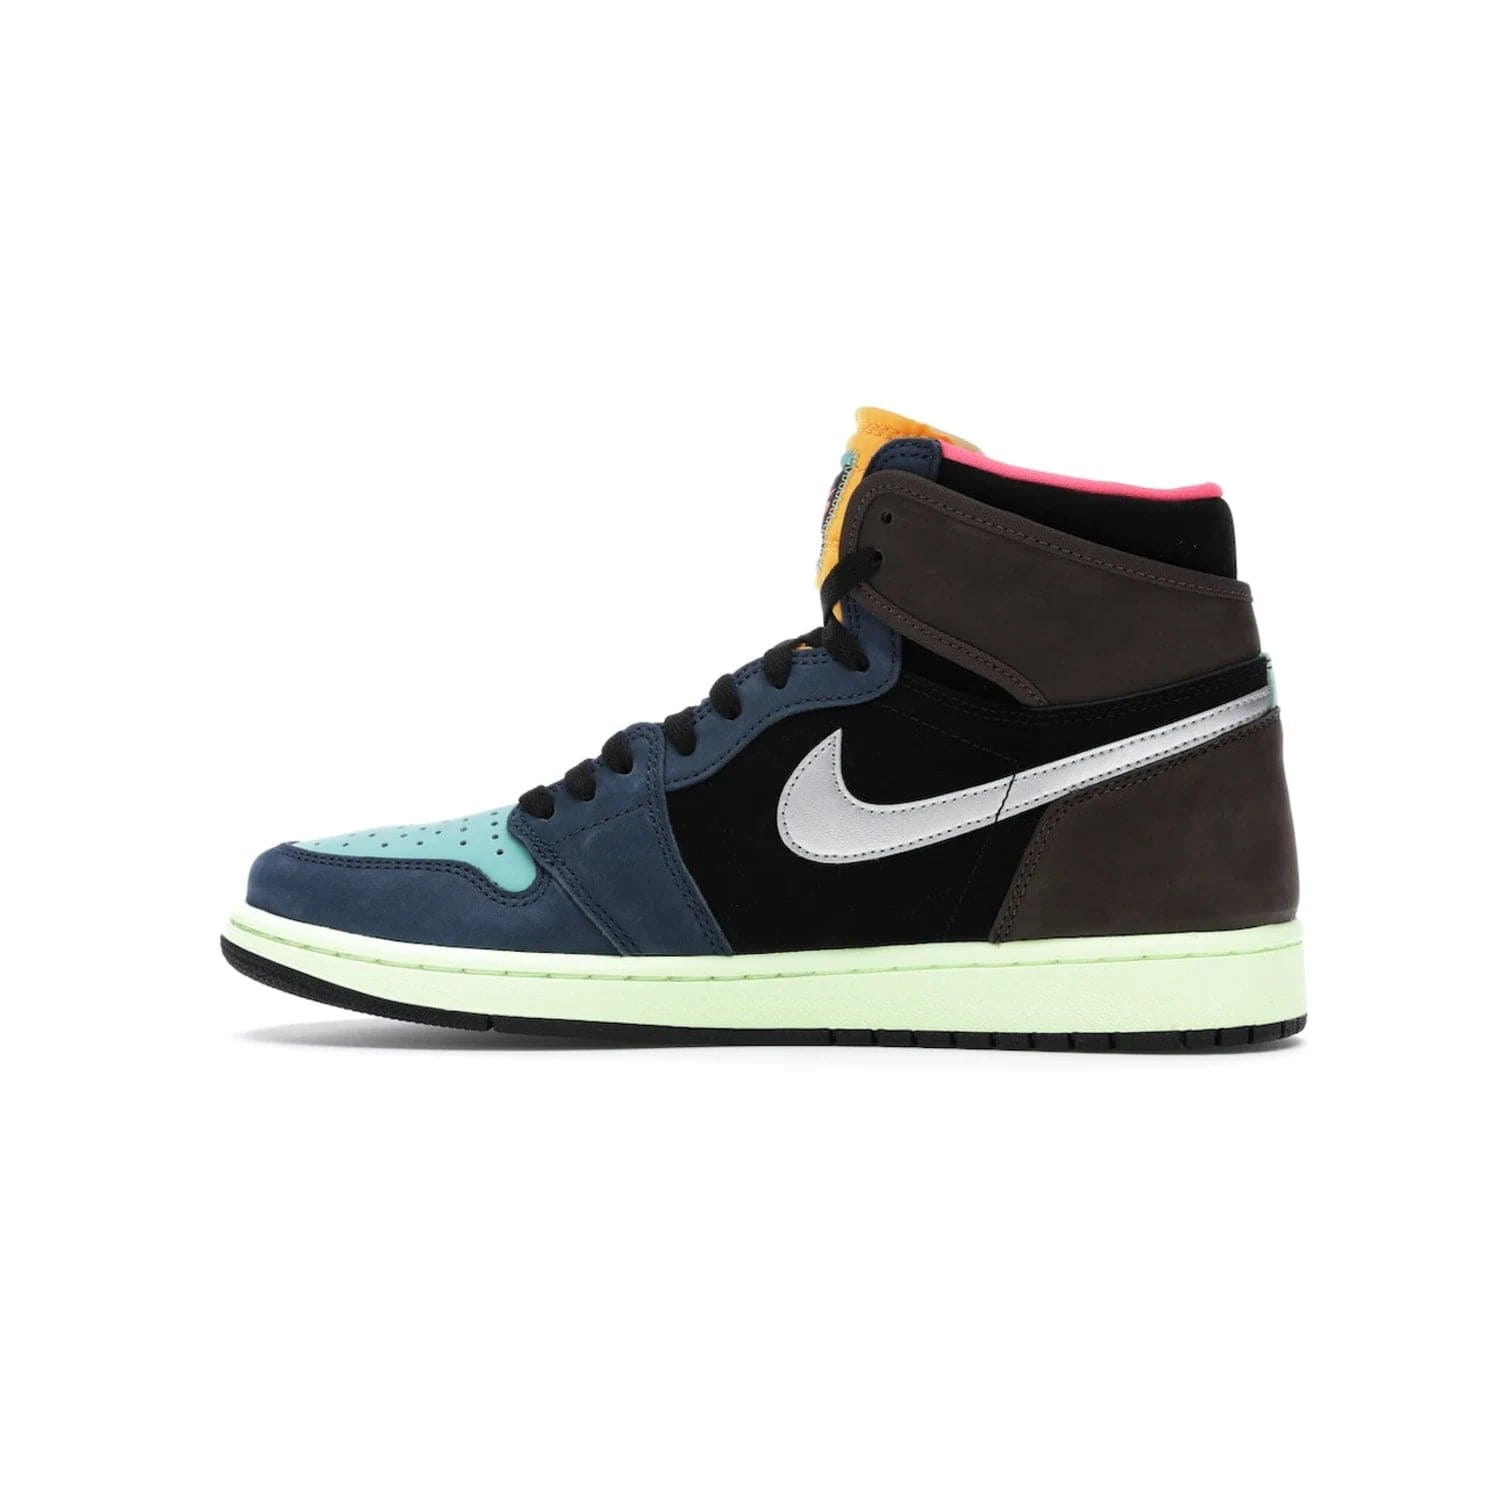 Jordan 1 Retro High Tokyo Bio Hack - Image 20 - Only at www.BallersClubKickz.com - Step up your sneaker game with the Air Jordan 1 Retro High Tokyo Bio Hack! Unique design featuring multiple materials and eye-catching colors. Metallic leather Swoosh and light green midsole for a stunning look. Available now for just $170.